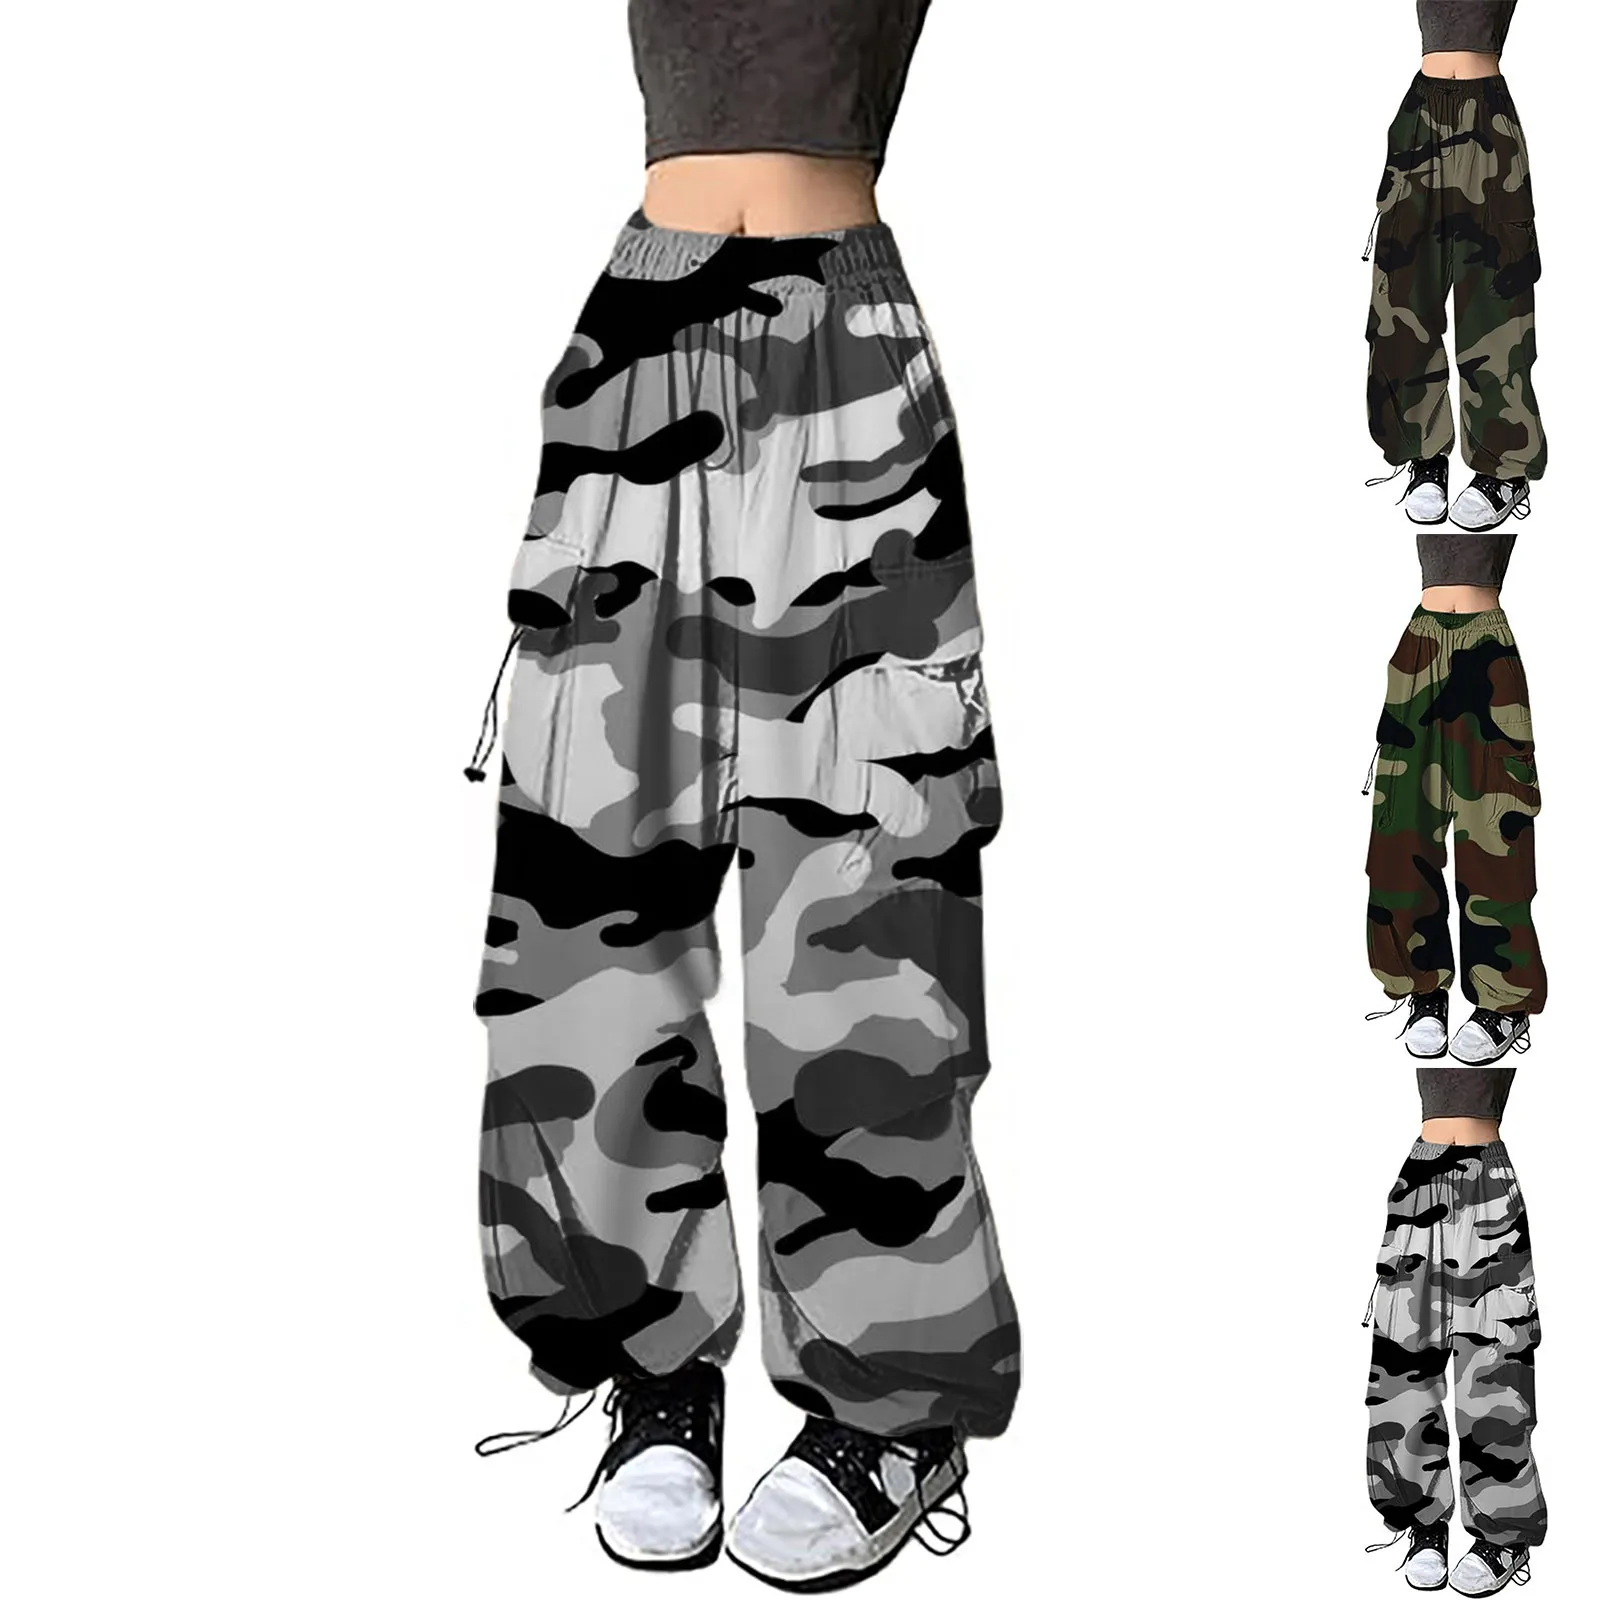 Stretchy Waist Womens Baggy Cargo Pants Y2K Streetwear Hip Hop Joggers Sweatpants Casual Loose Camouflage Wide Leg Trousers womens button fly jeans butt lifting stretchy slim bootcut elastic waist dark wash columbia jeans push up ouc394